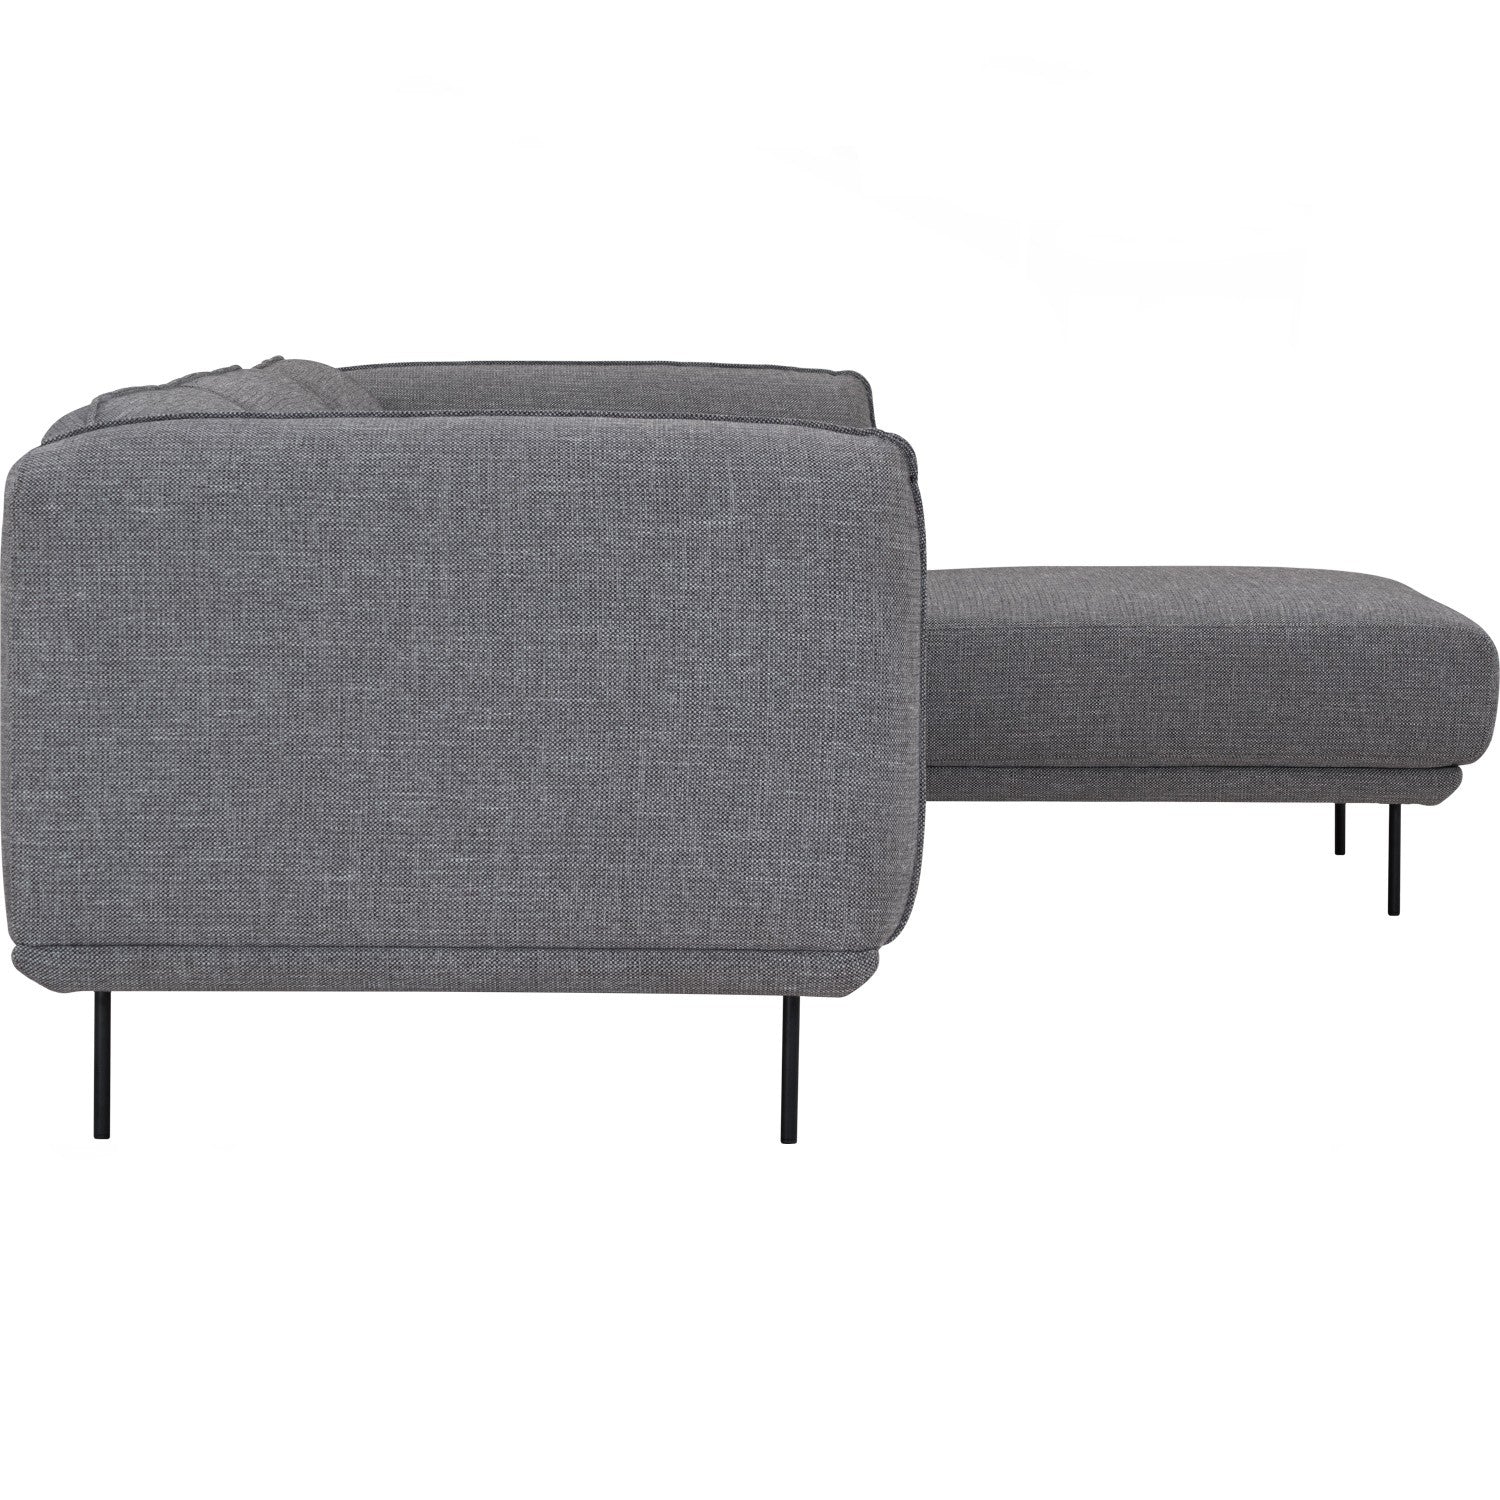 RUND Sofa 3 Seater with Chaise